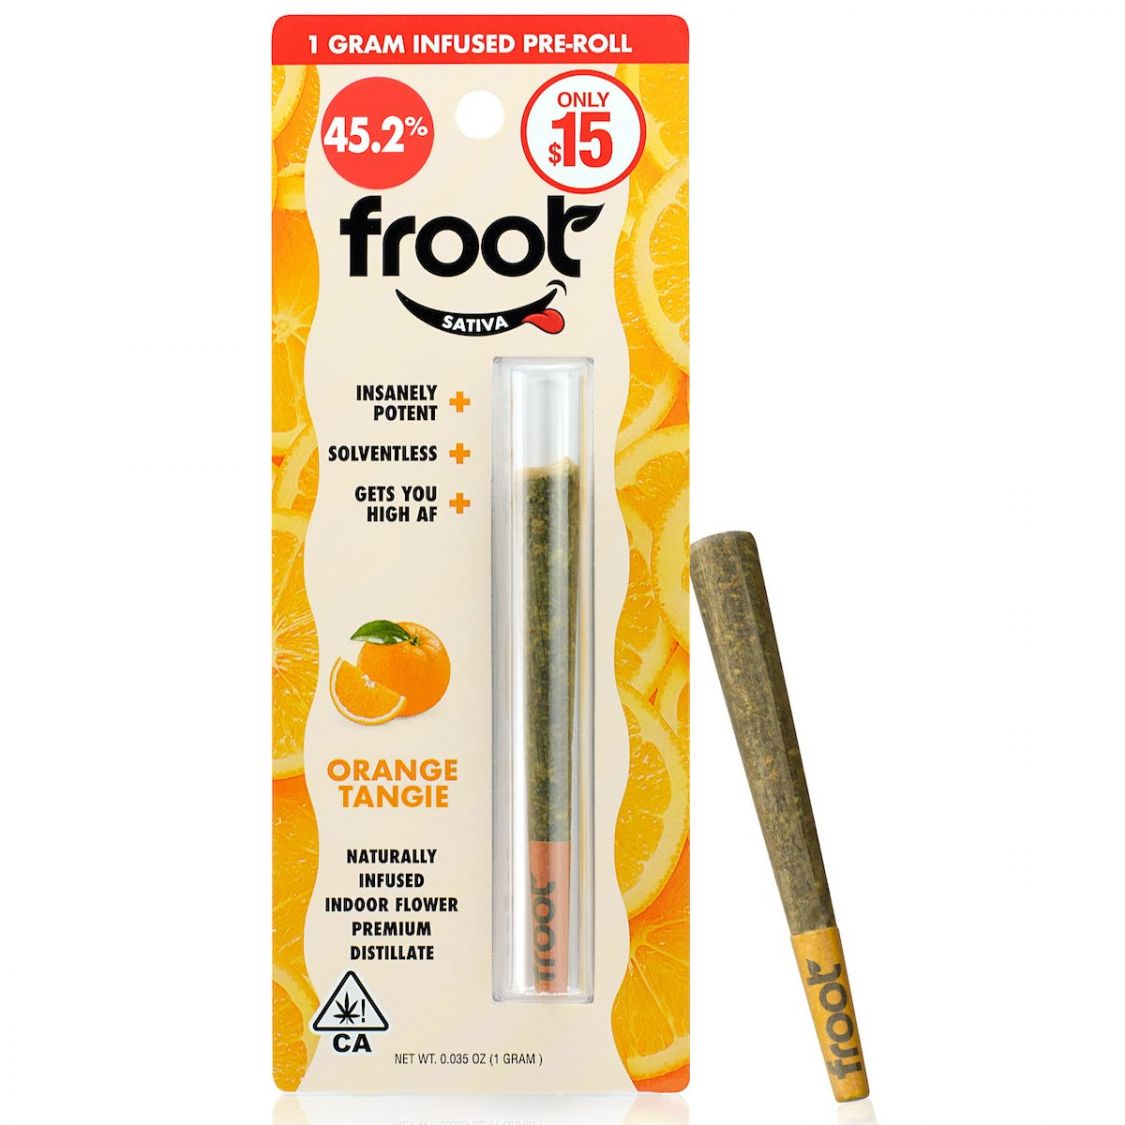 Froot Orange Tangie Infused Pre-Roll Pre-rolls Infused Pre-Rolls